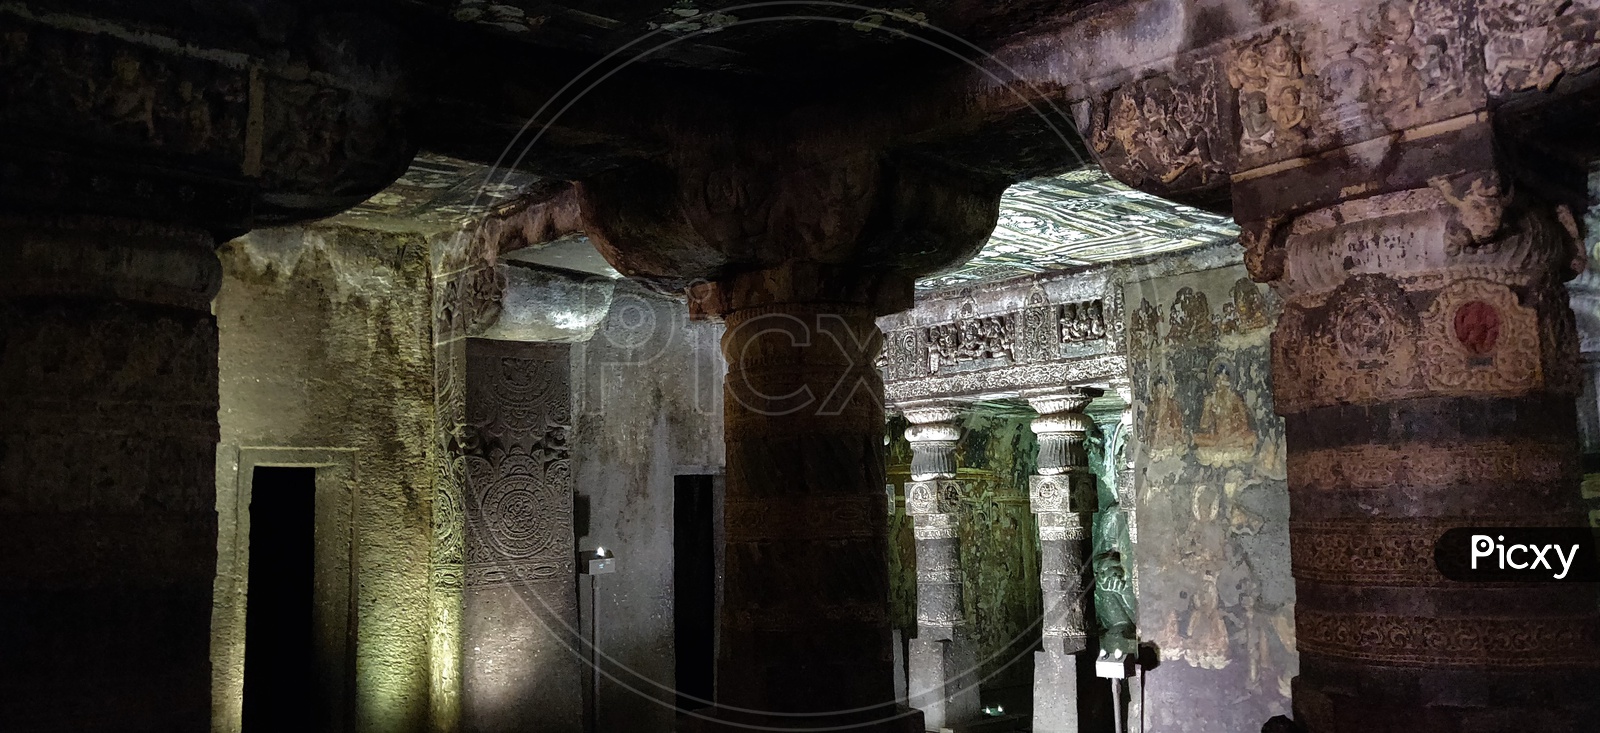 Ancient Stone Cravings of Pillars  Ajanta Caves    Or  Tourist Attraction Of  Ancient Caves At Ajanta in Deccan Plateau